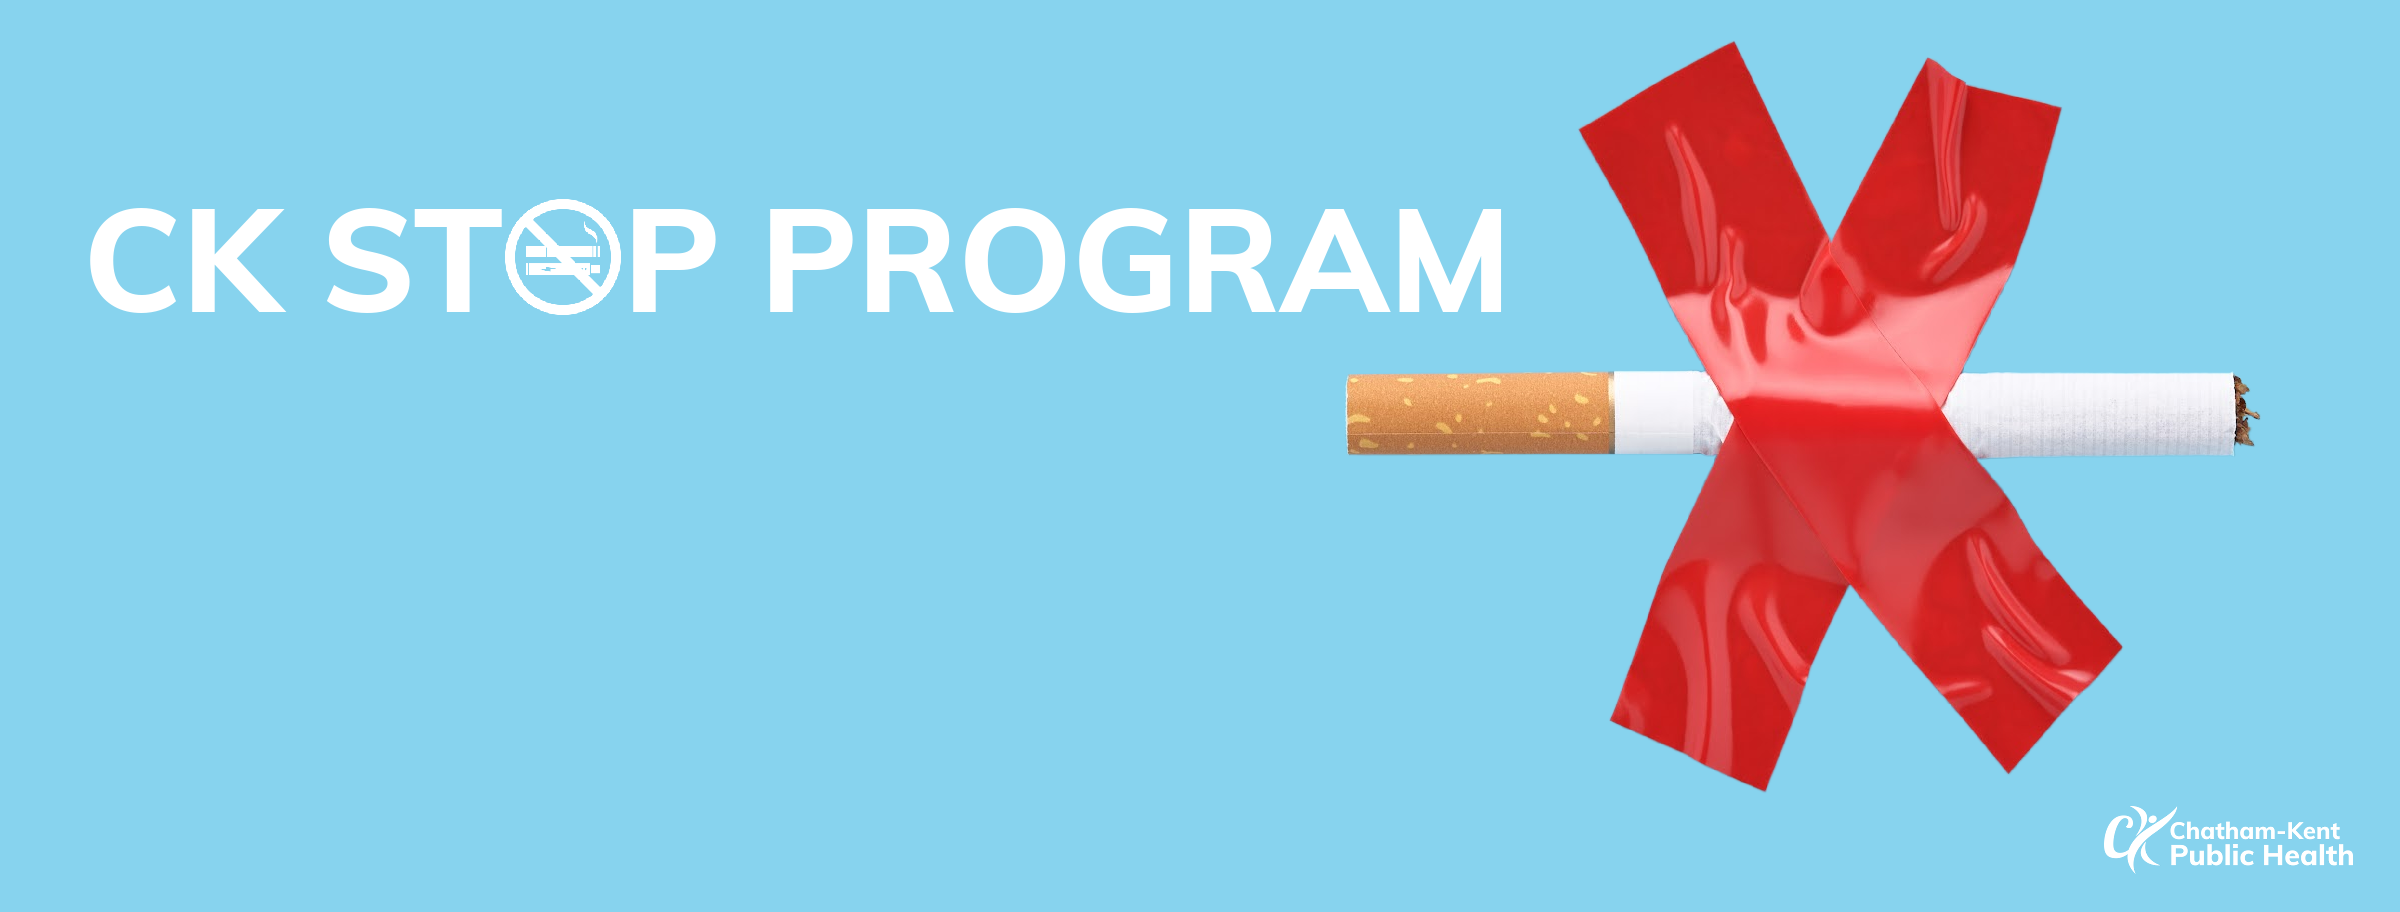 Starting May 2023, CK residents aged 18+ without primary care provider can receive up to 26 weeks of free supplies (patches, gum, lozenges, inhaler) to help them with their quit attempt